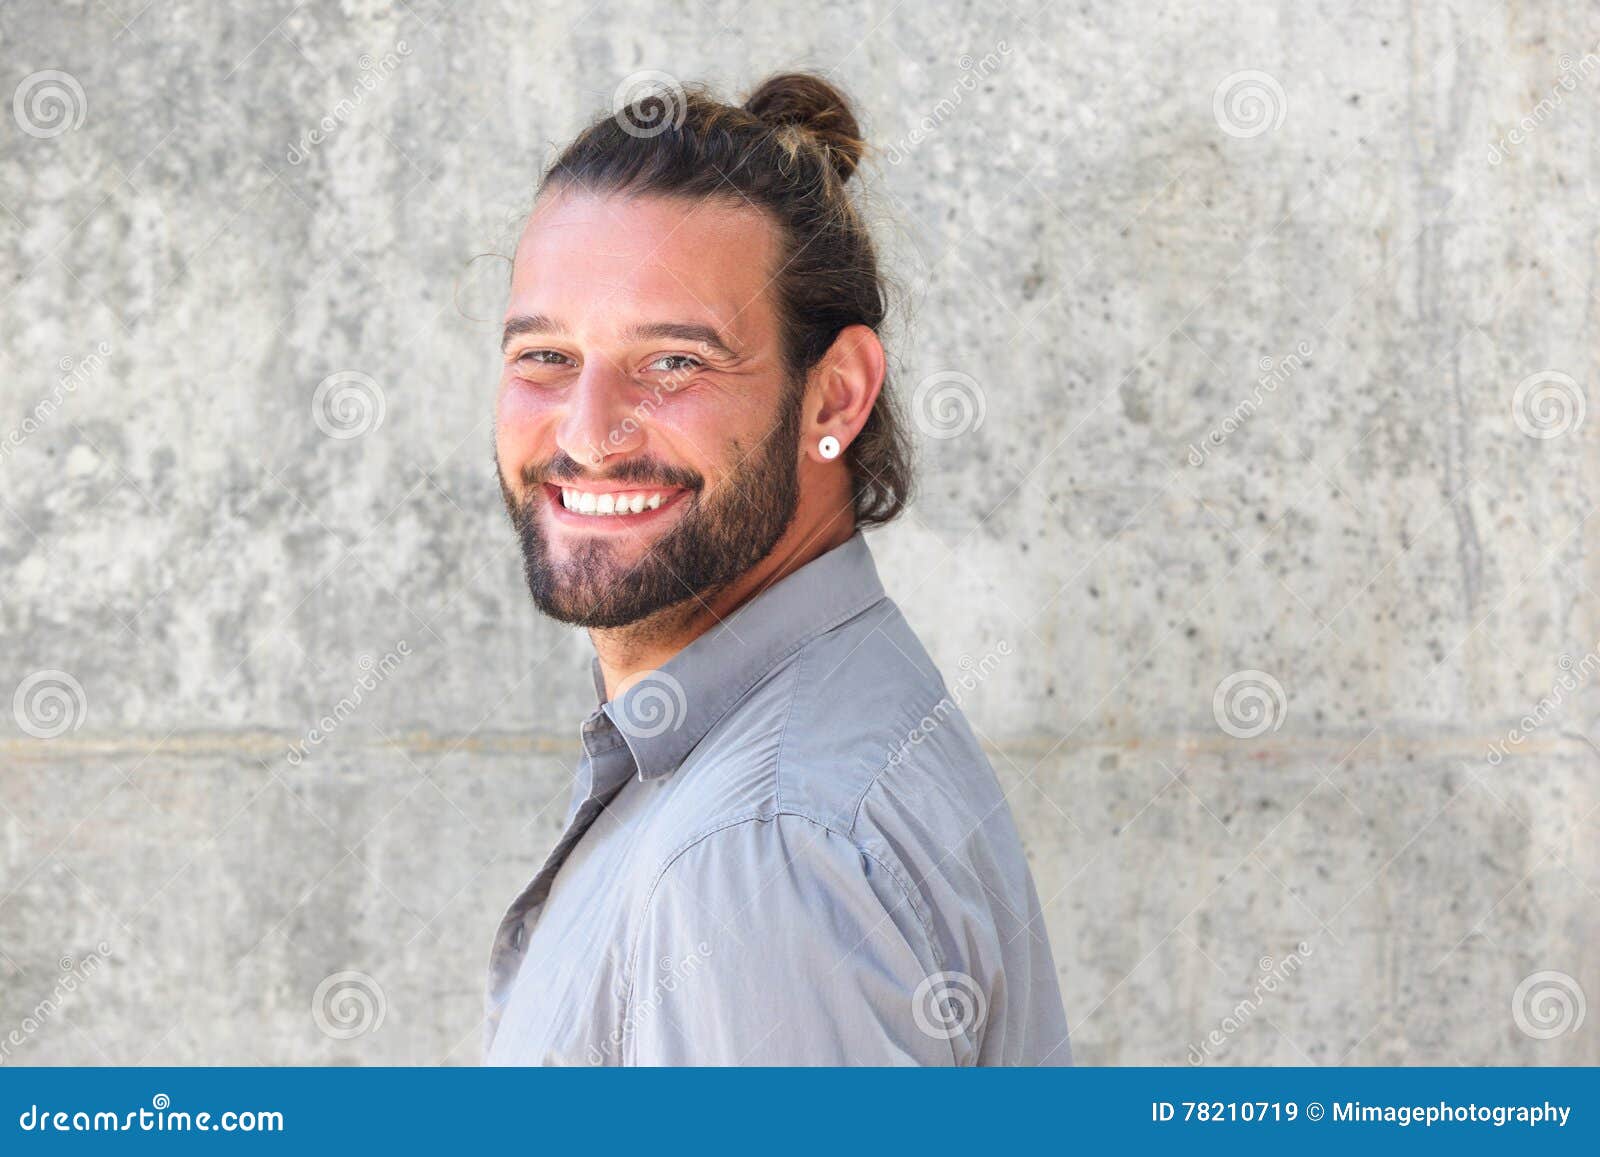 Smiling Man with Beard Looking Over Shoulder Stock Image - Image of ...